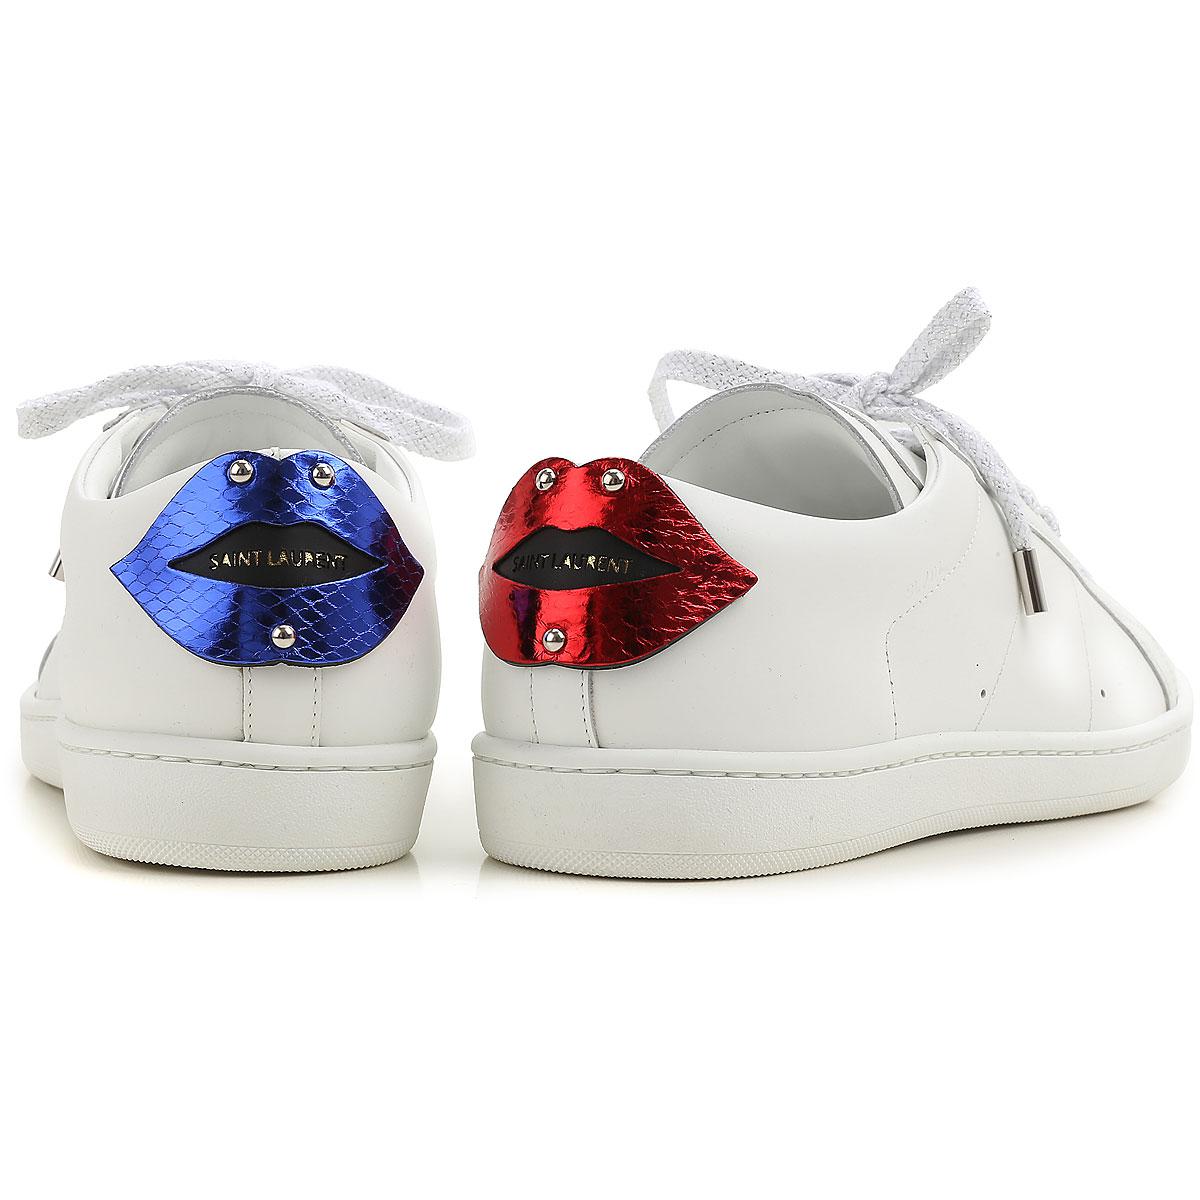 Saint Laurent Lace Sneakers For Men On Sale in White for Men - Lyst